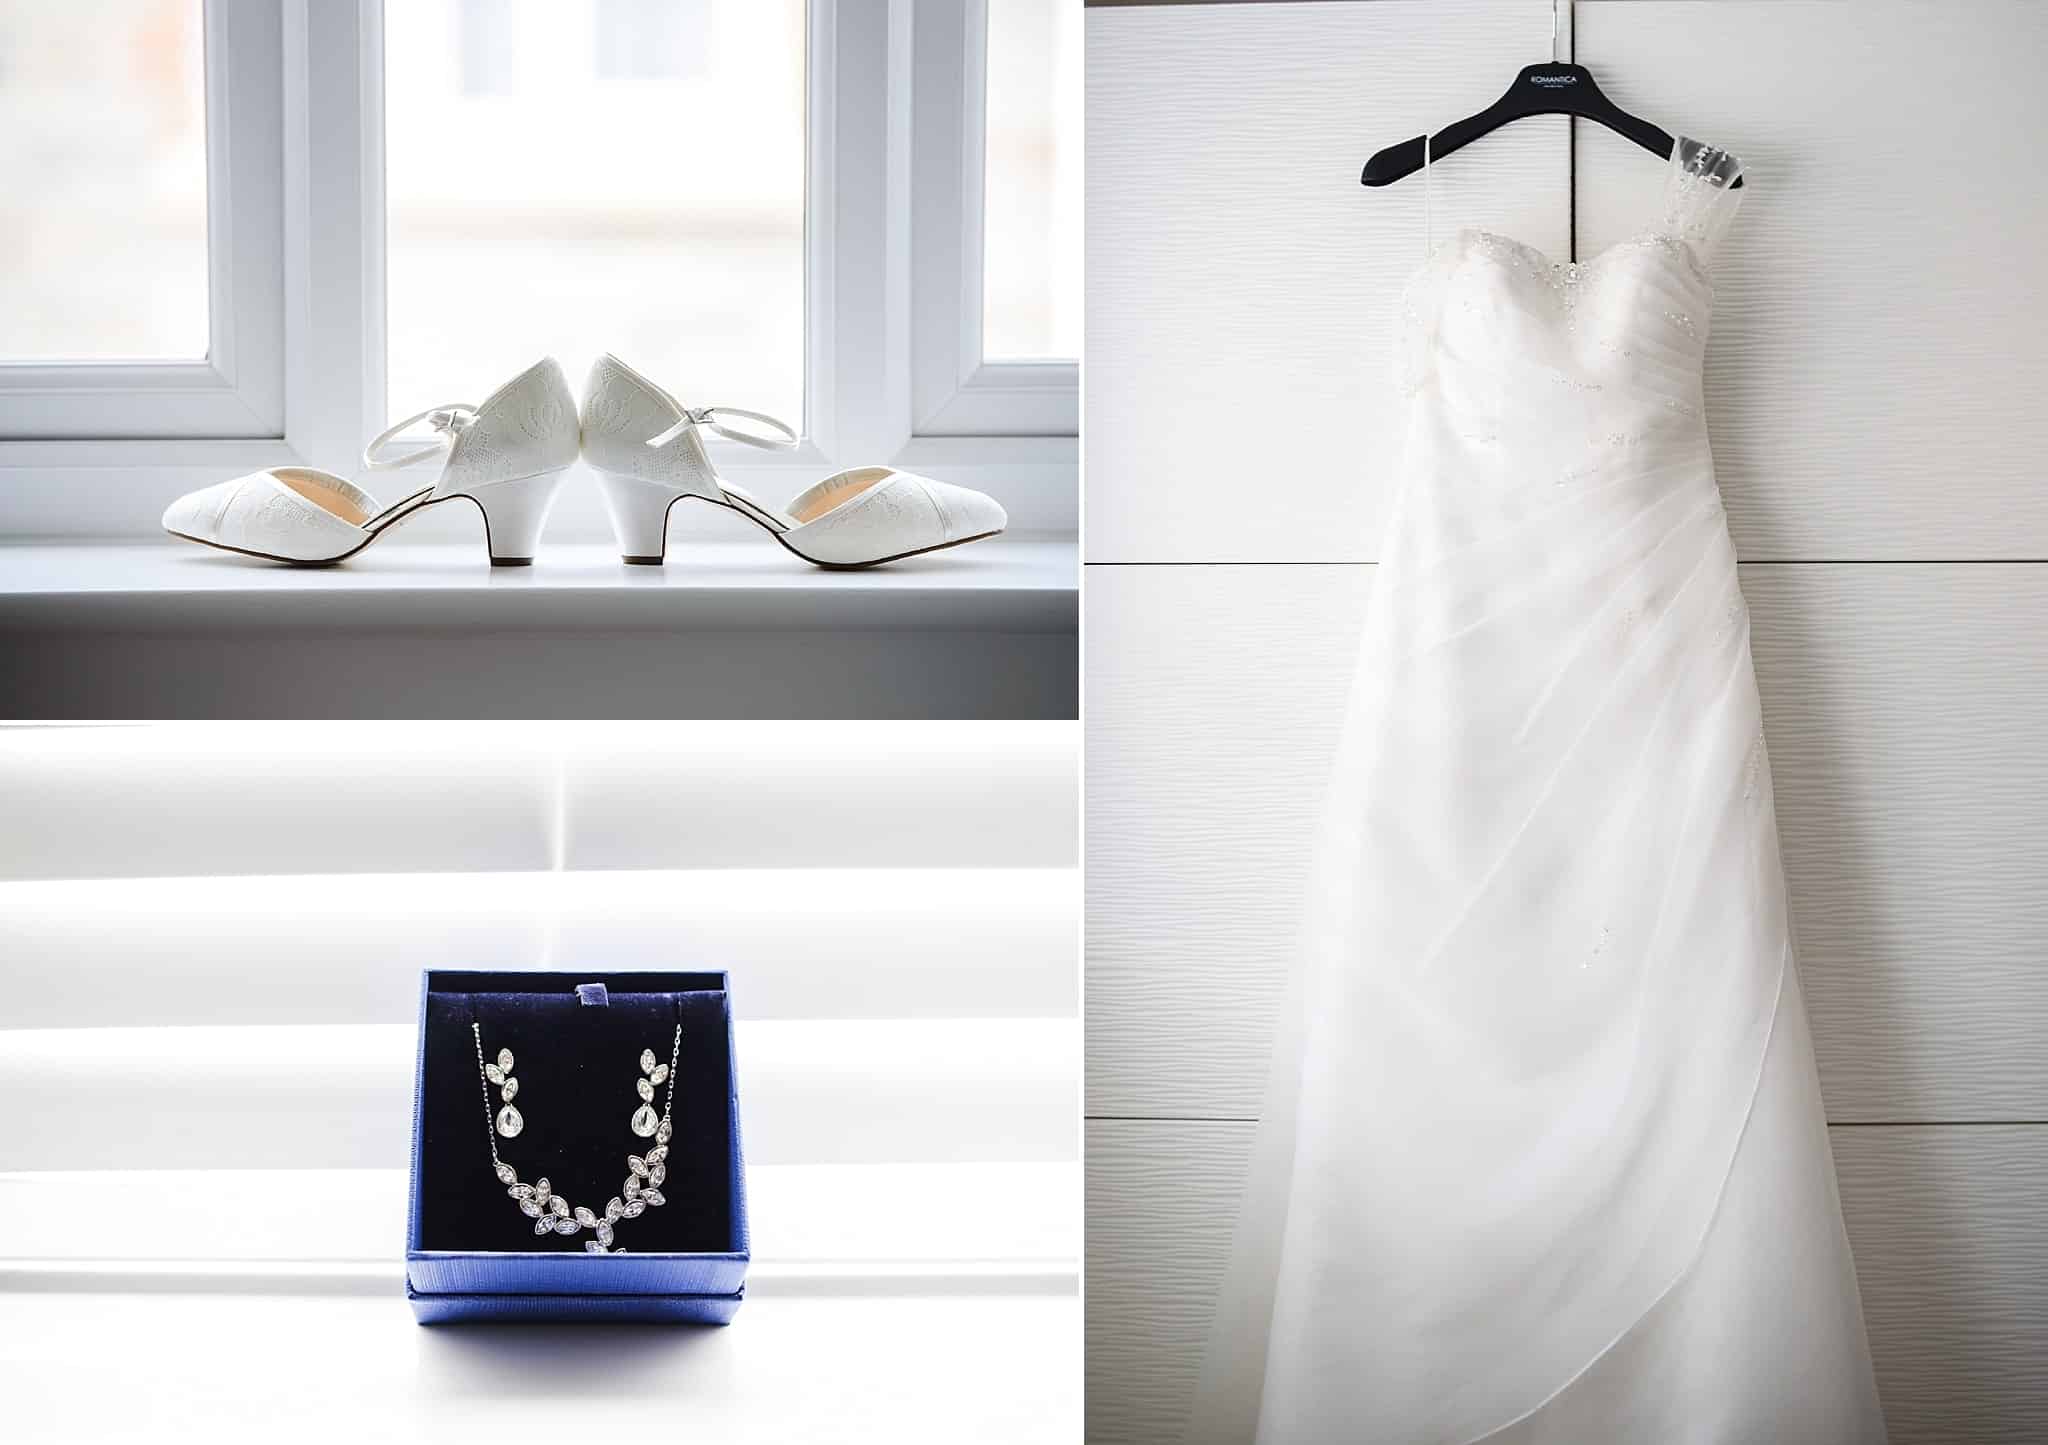 Wedding details, the dress, shoes and jewellery